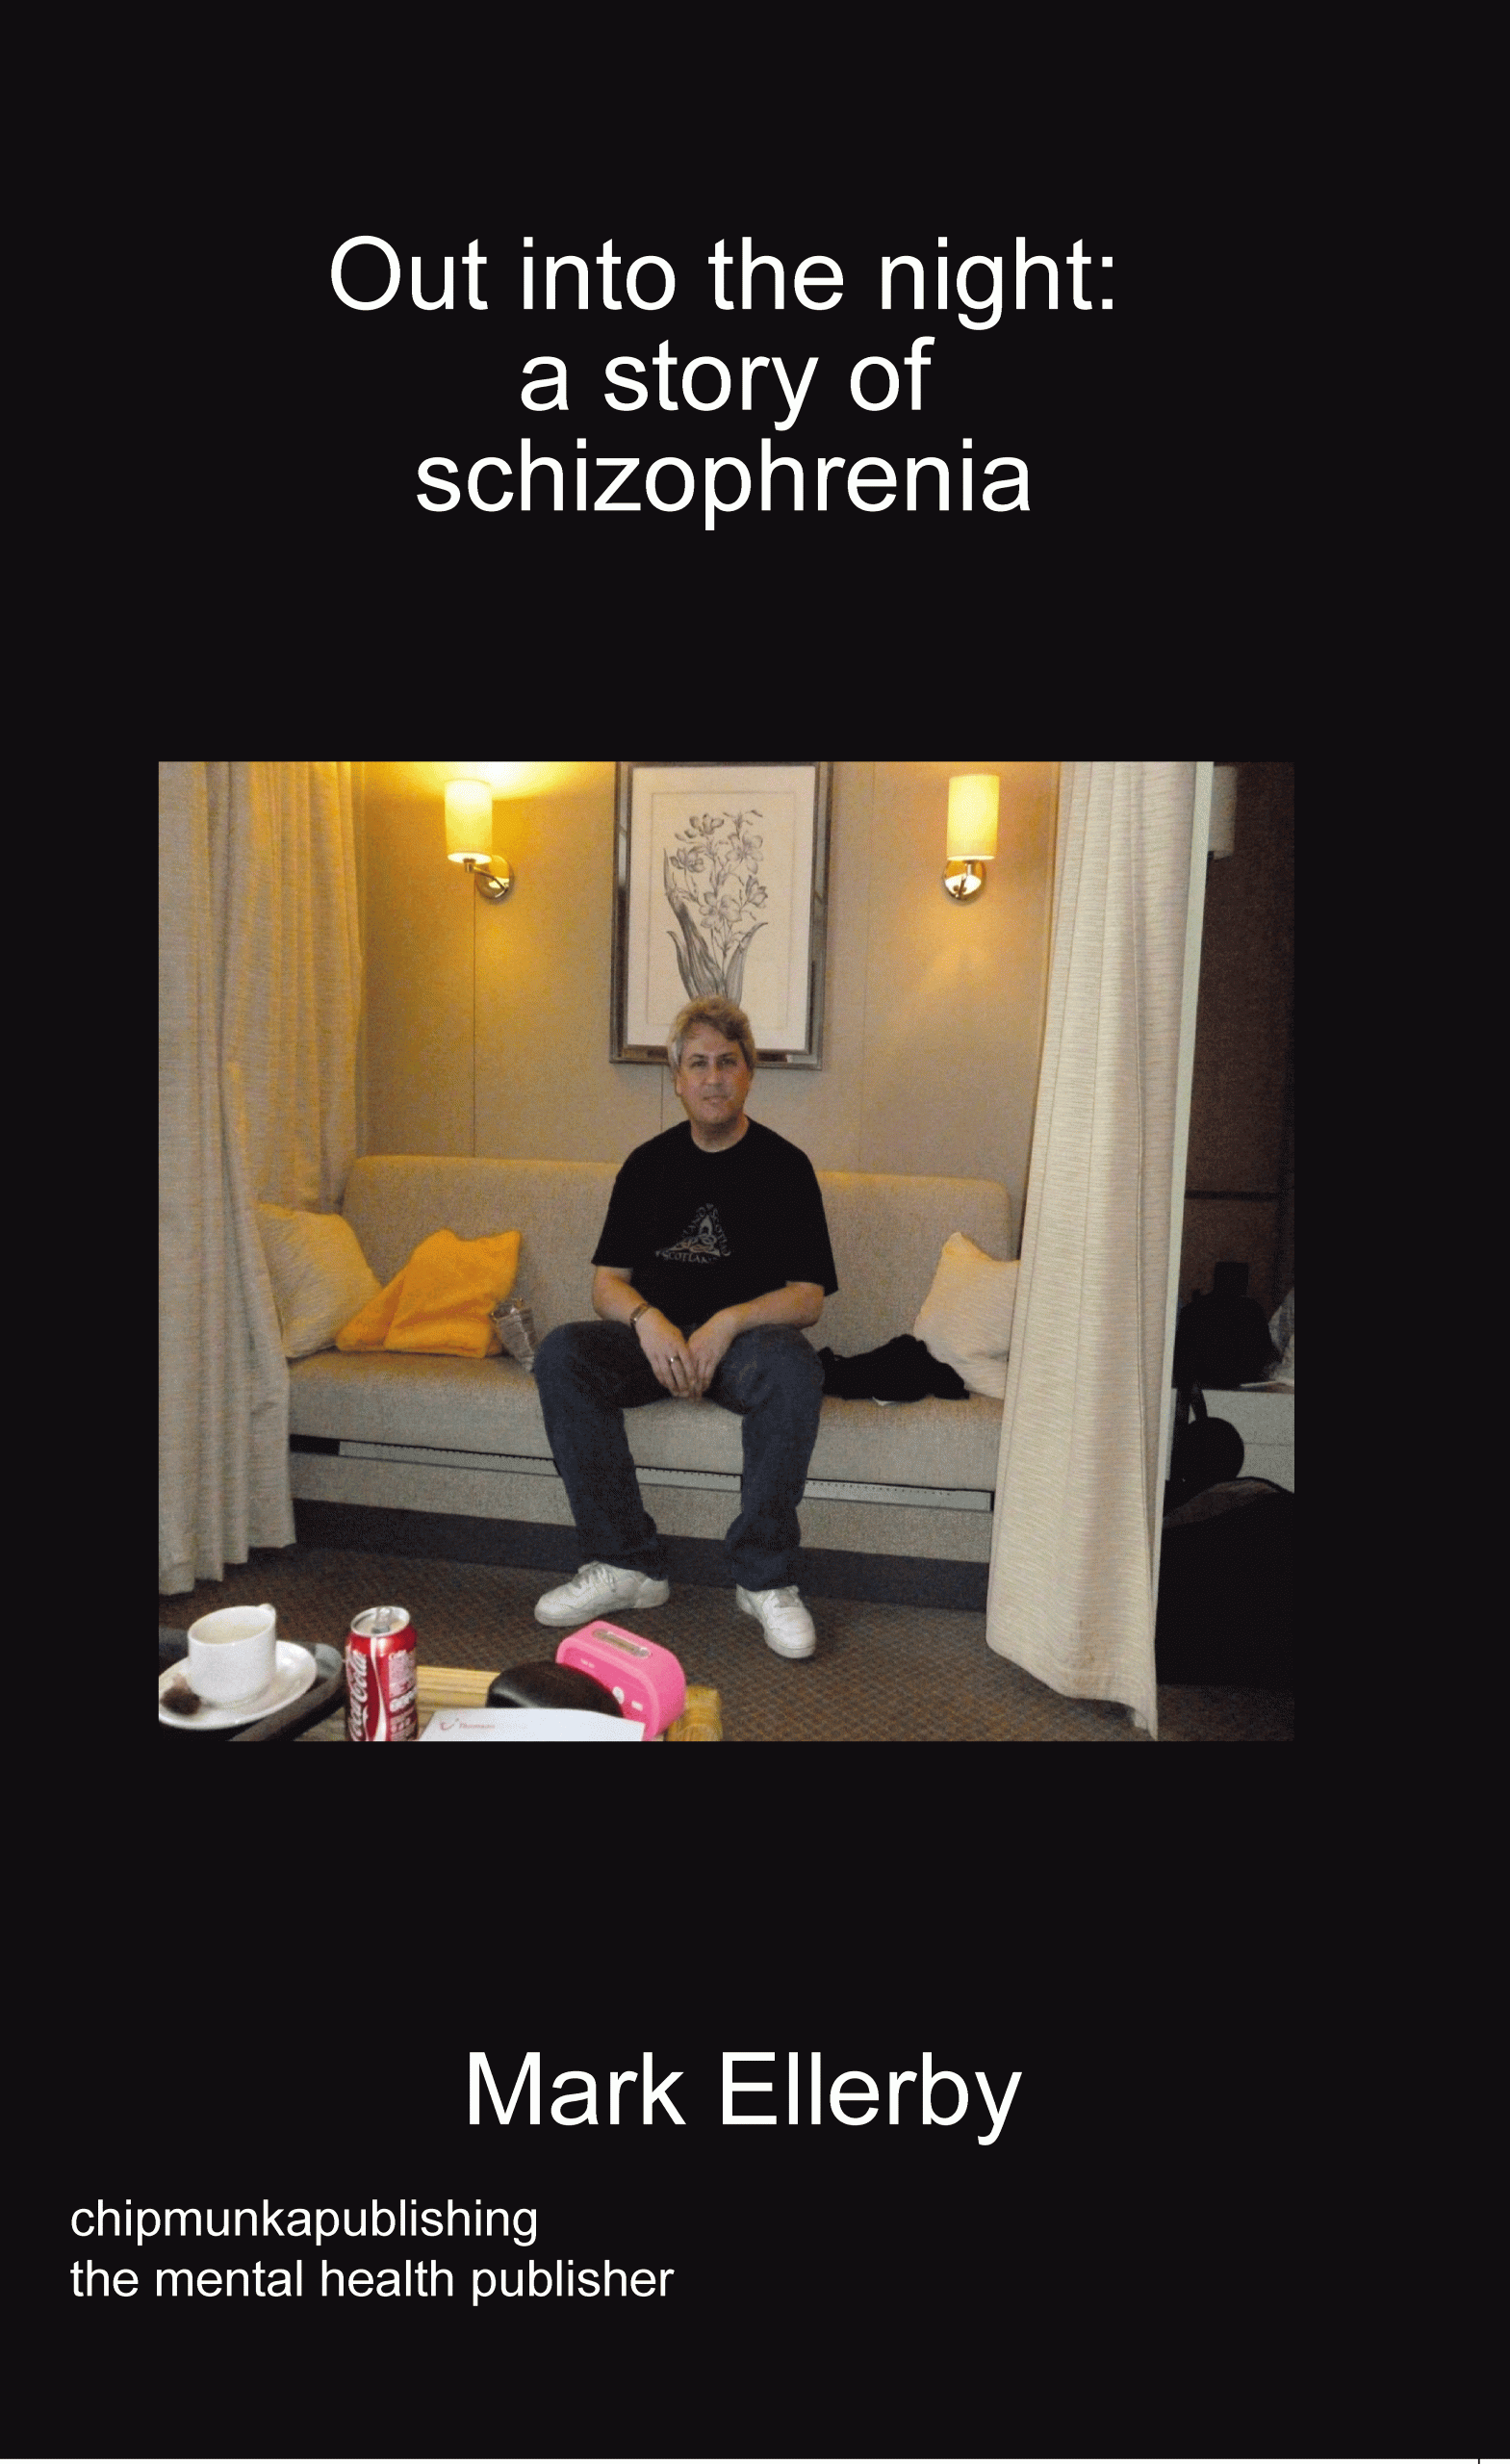 Out into the night. a story of schizophrenia